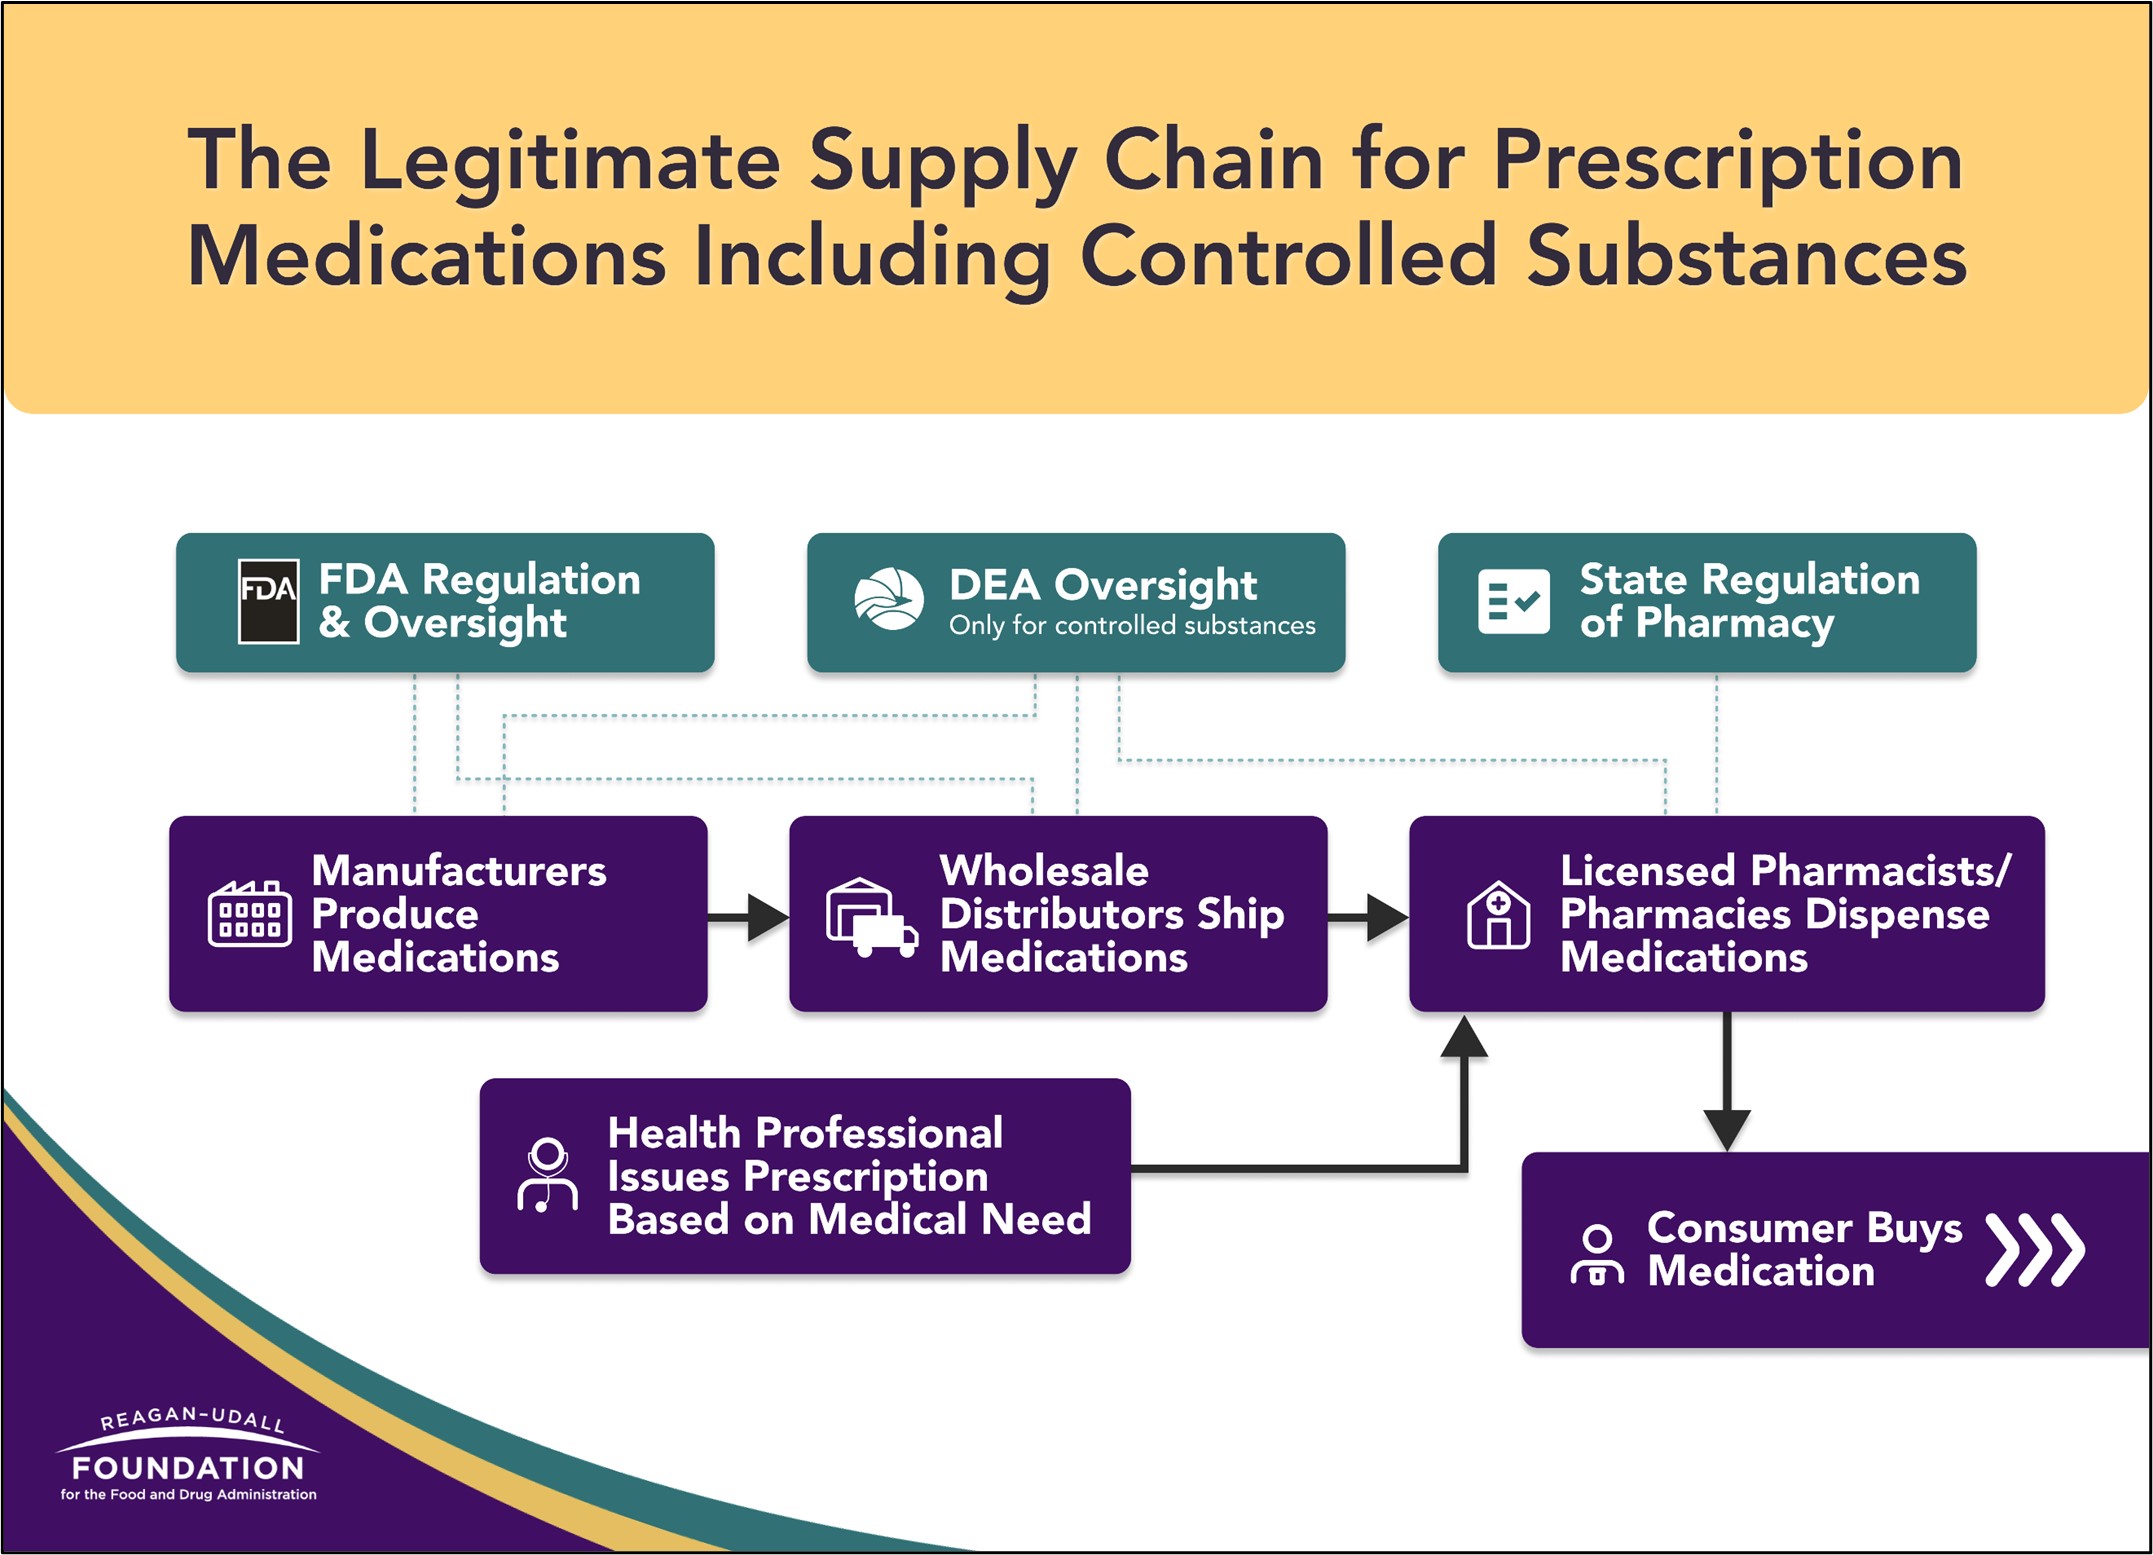 The Legitimate Supply Chain for Prescription Medications Including Controlled Substances